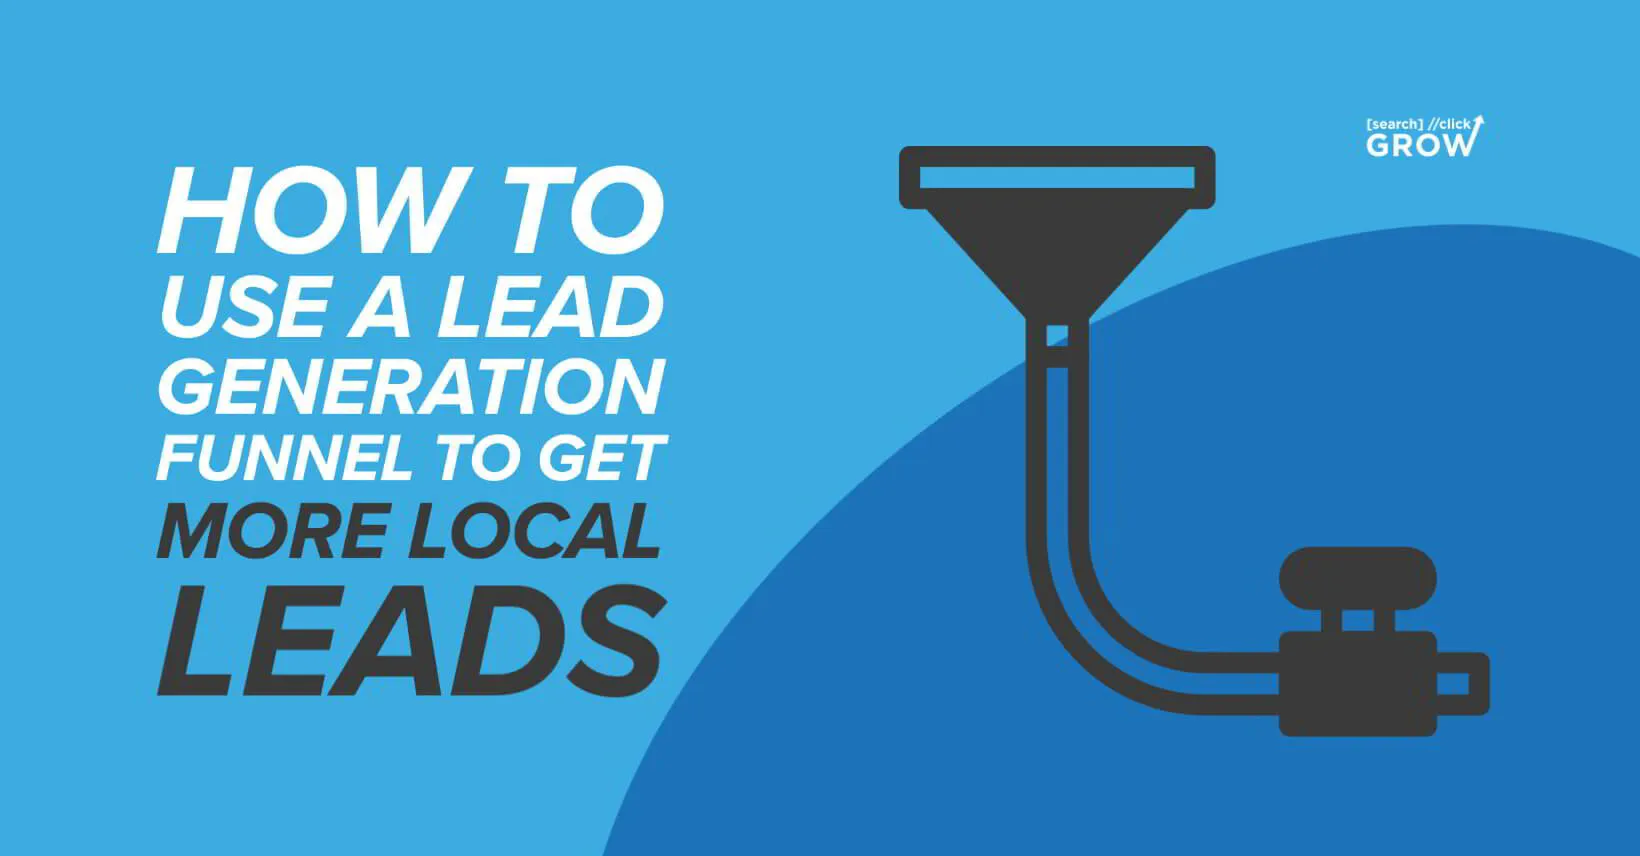 How to Use a Lead Generation Funnel to Get More Local Leads?